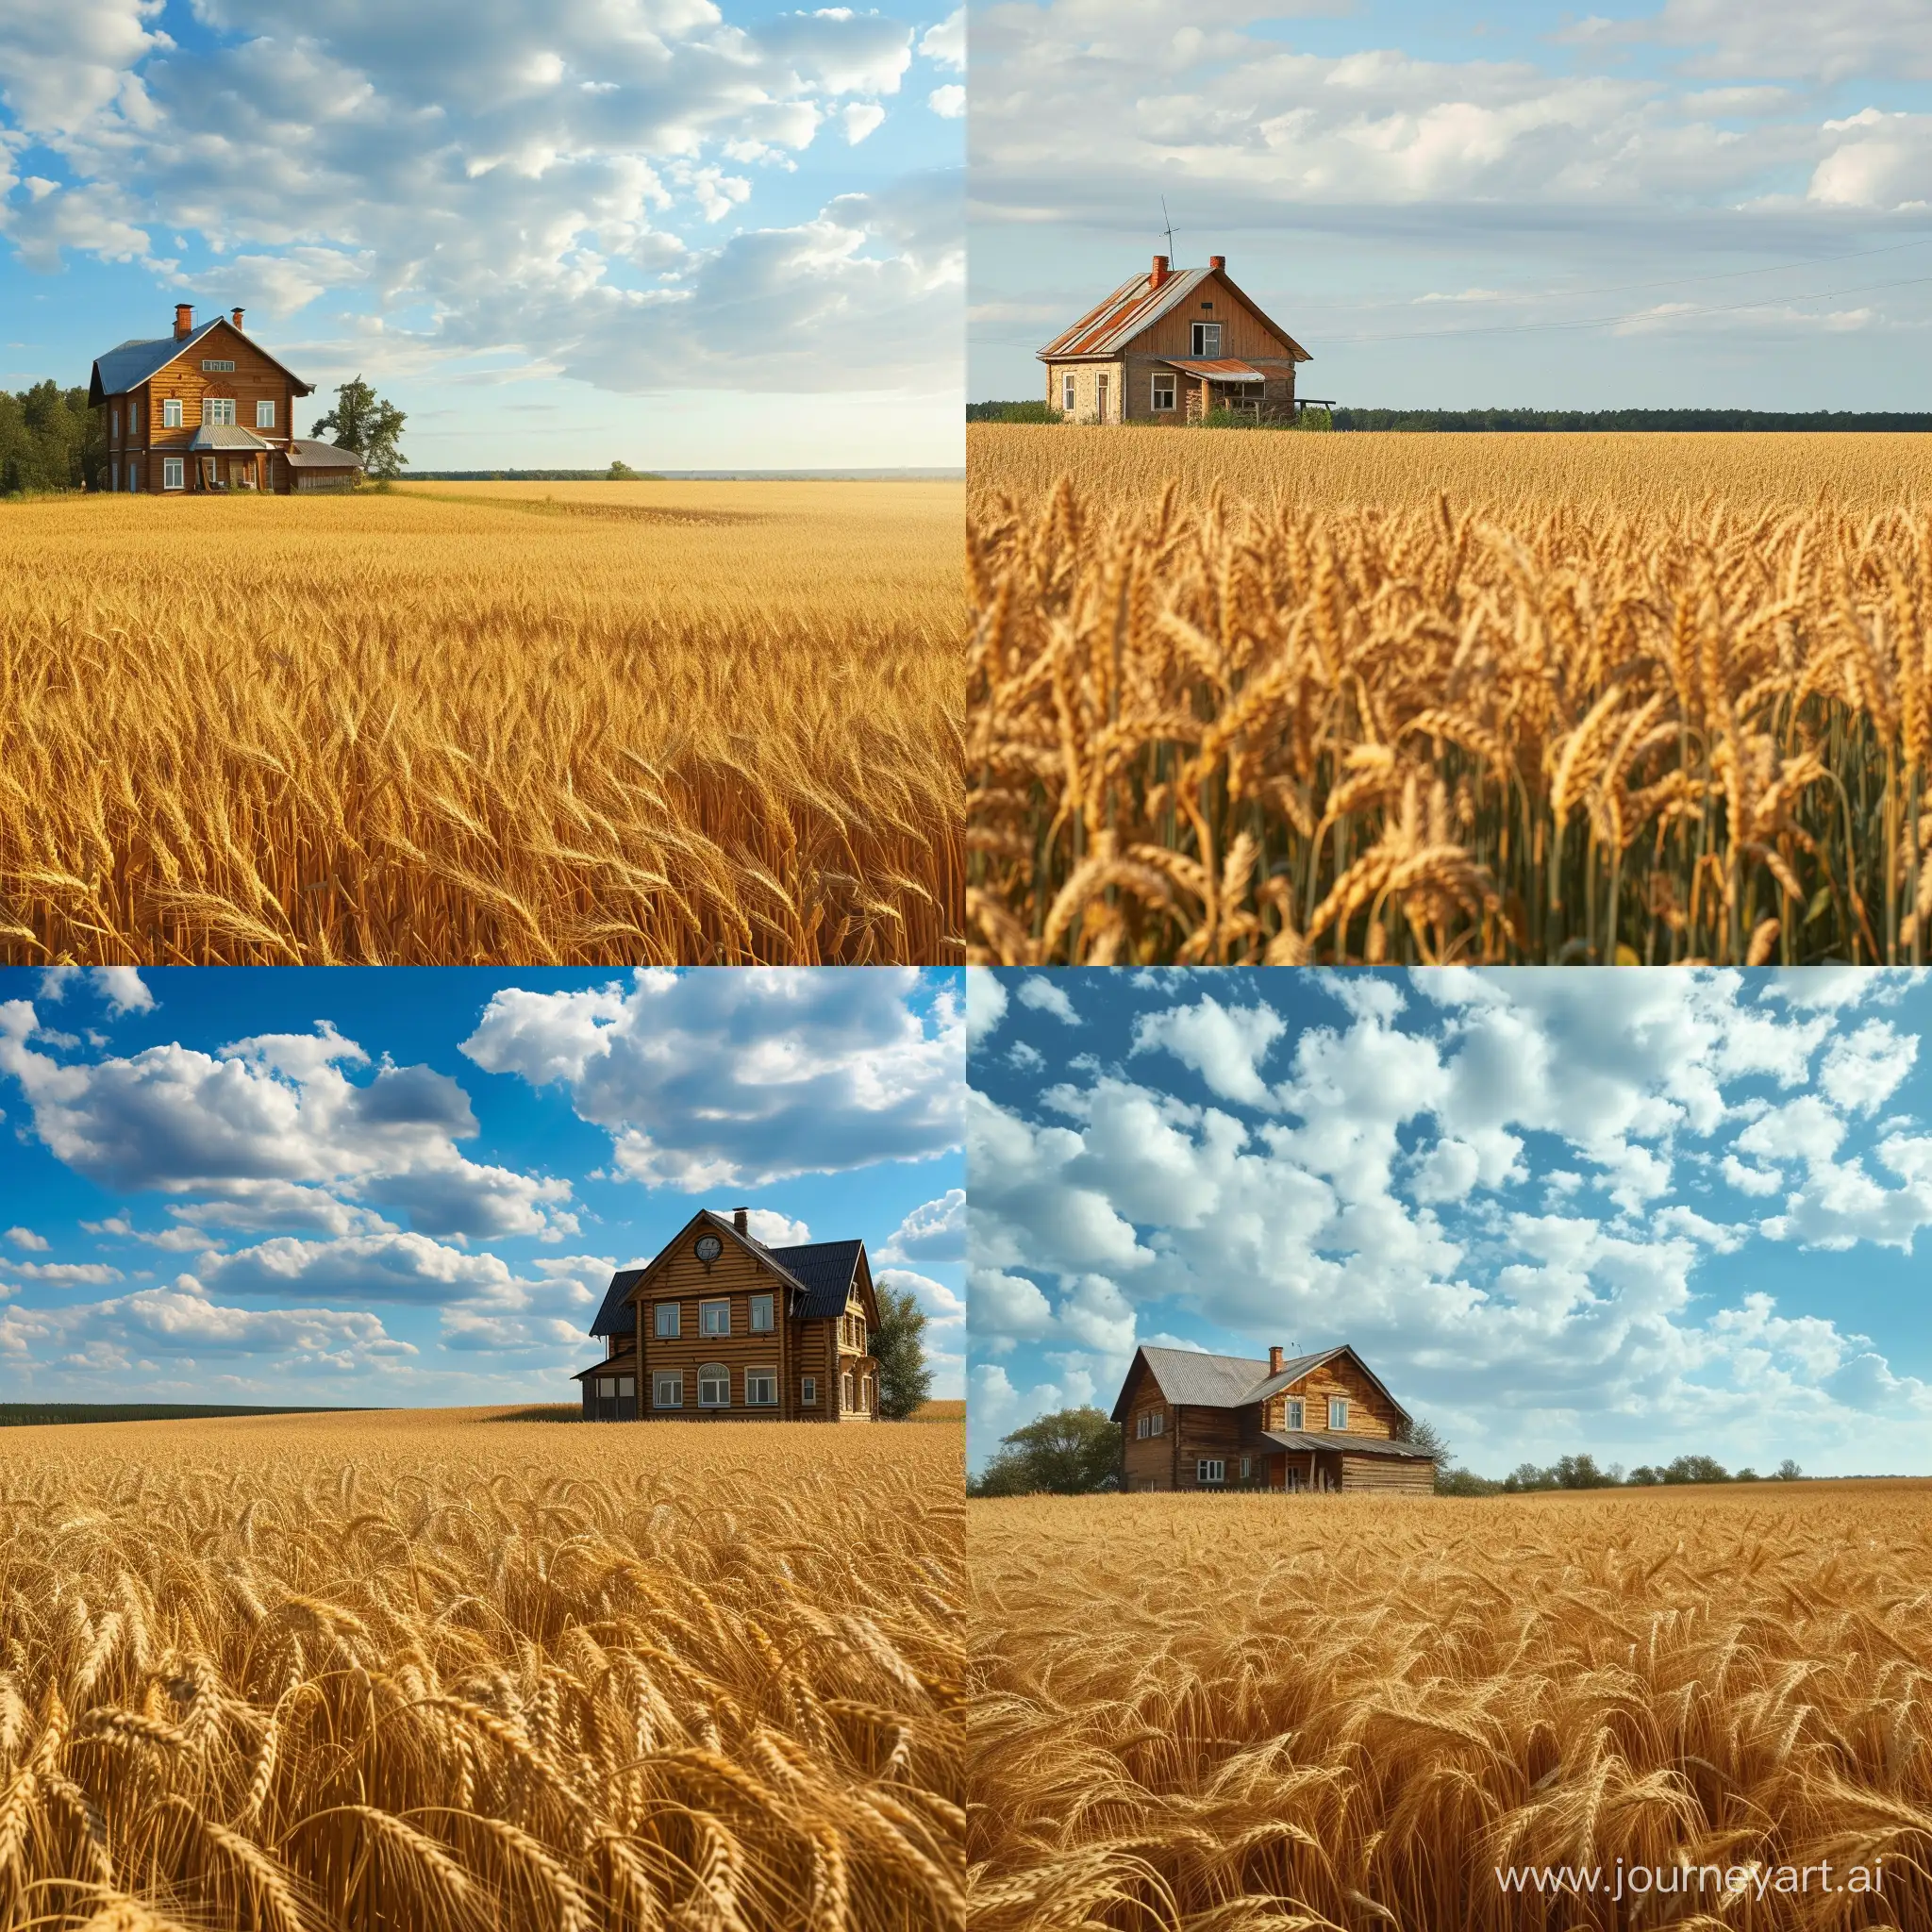 Picturesque-Rural-House-Amidst-Endless-VolgaStyle-Wheat-Fields